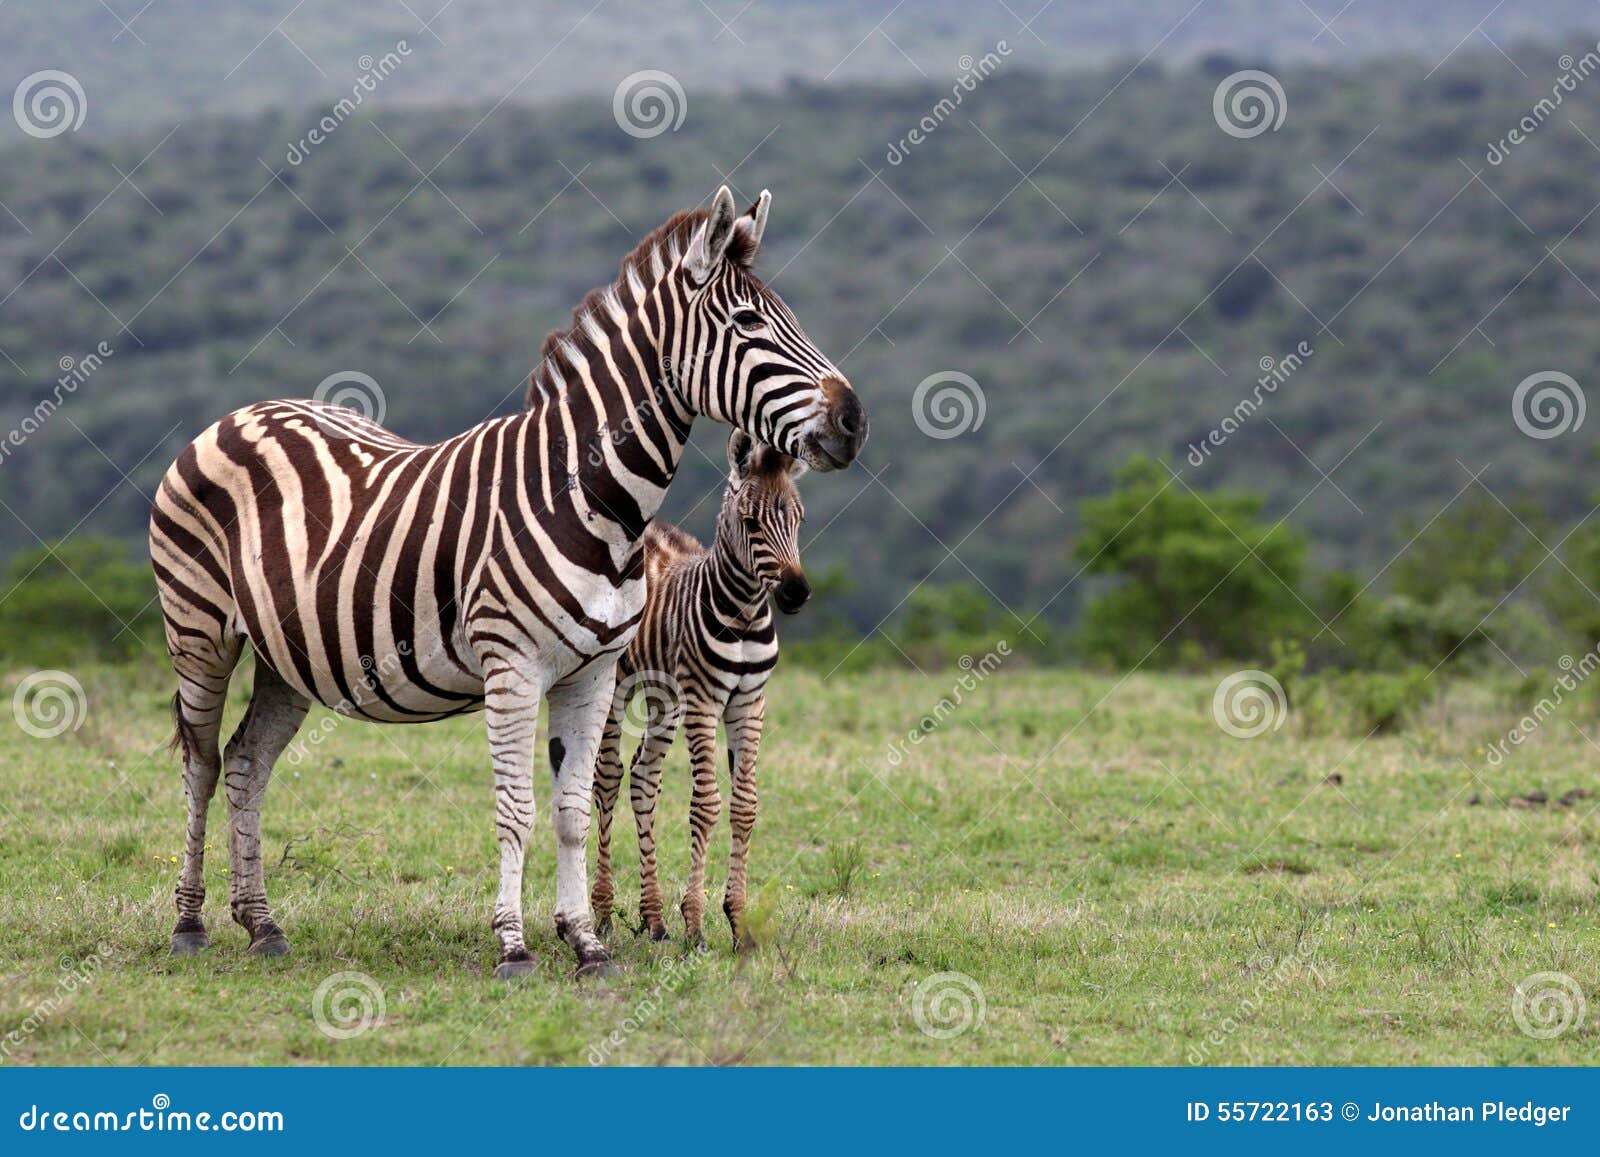 zebra and fowl. south africa